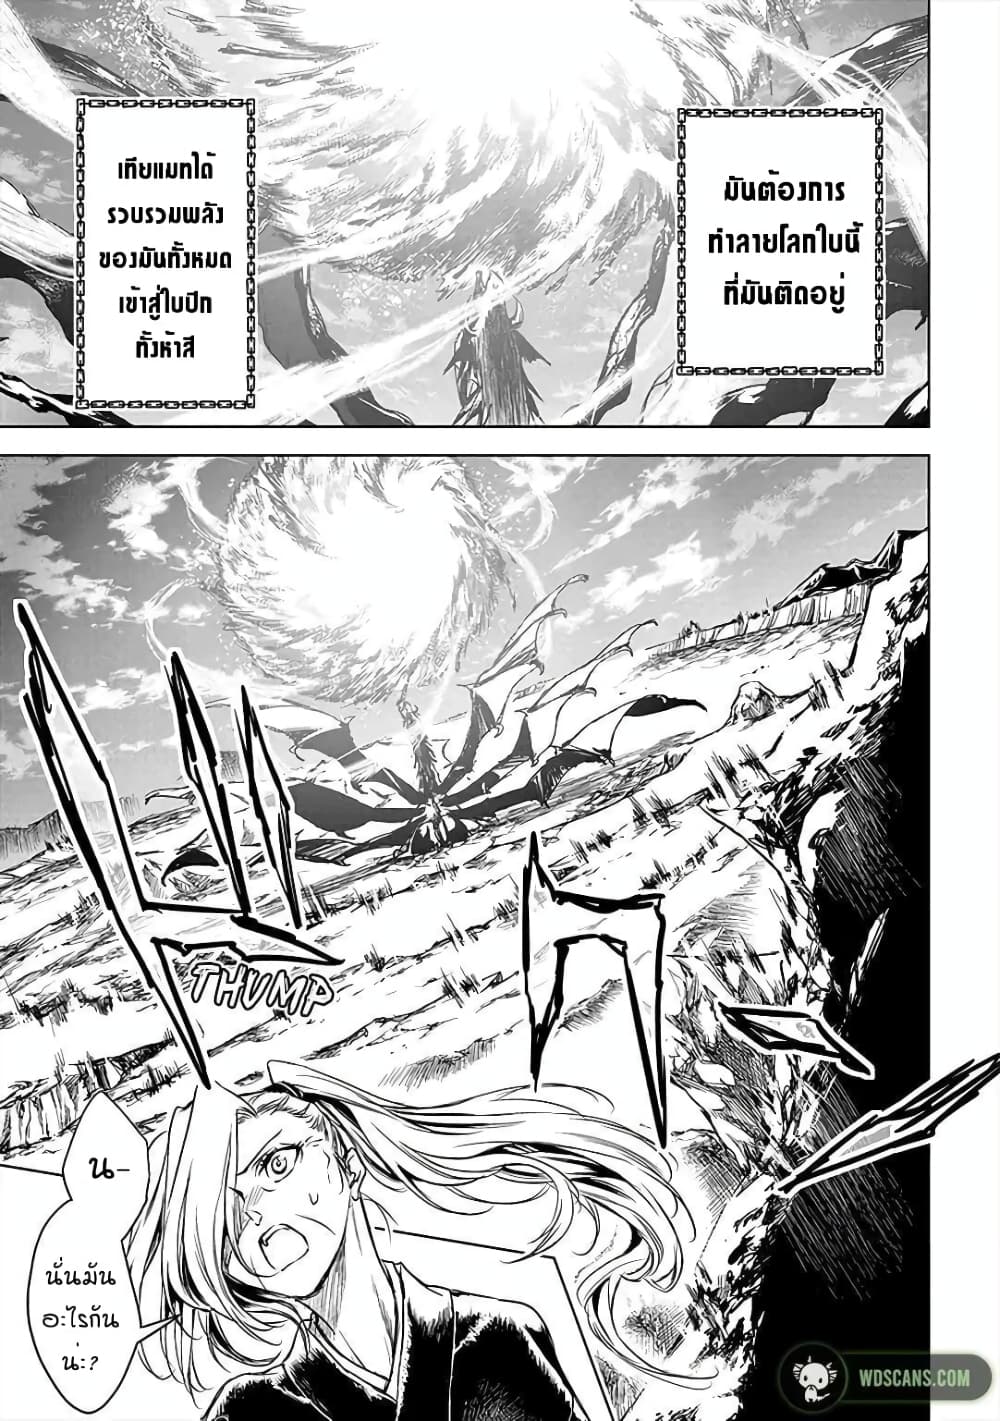 Ori of the Dragon Chain Heart in the Mind 8 (12)